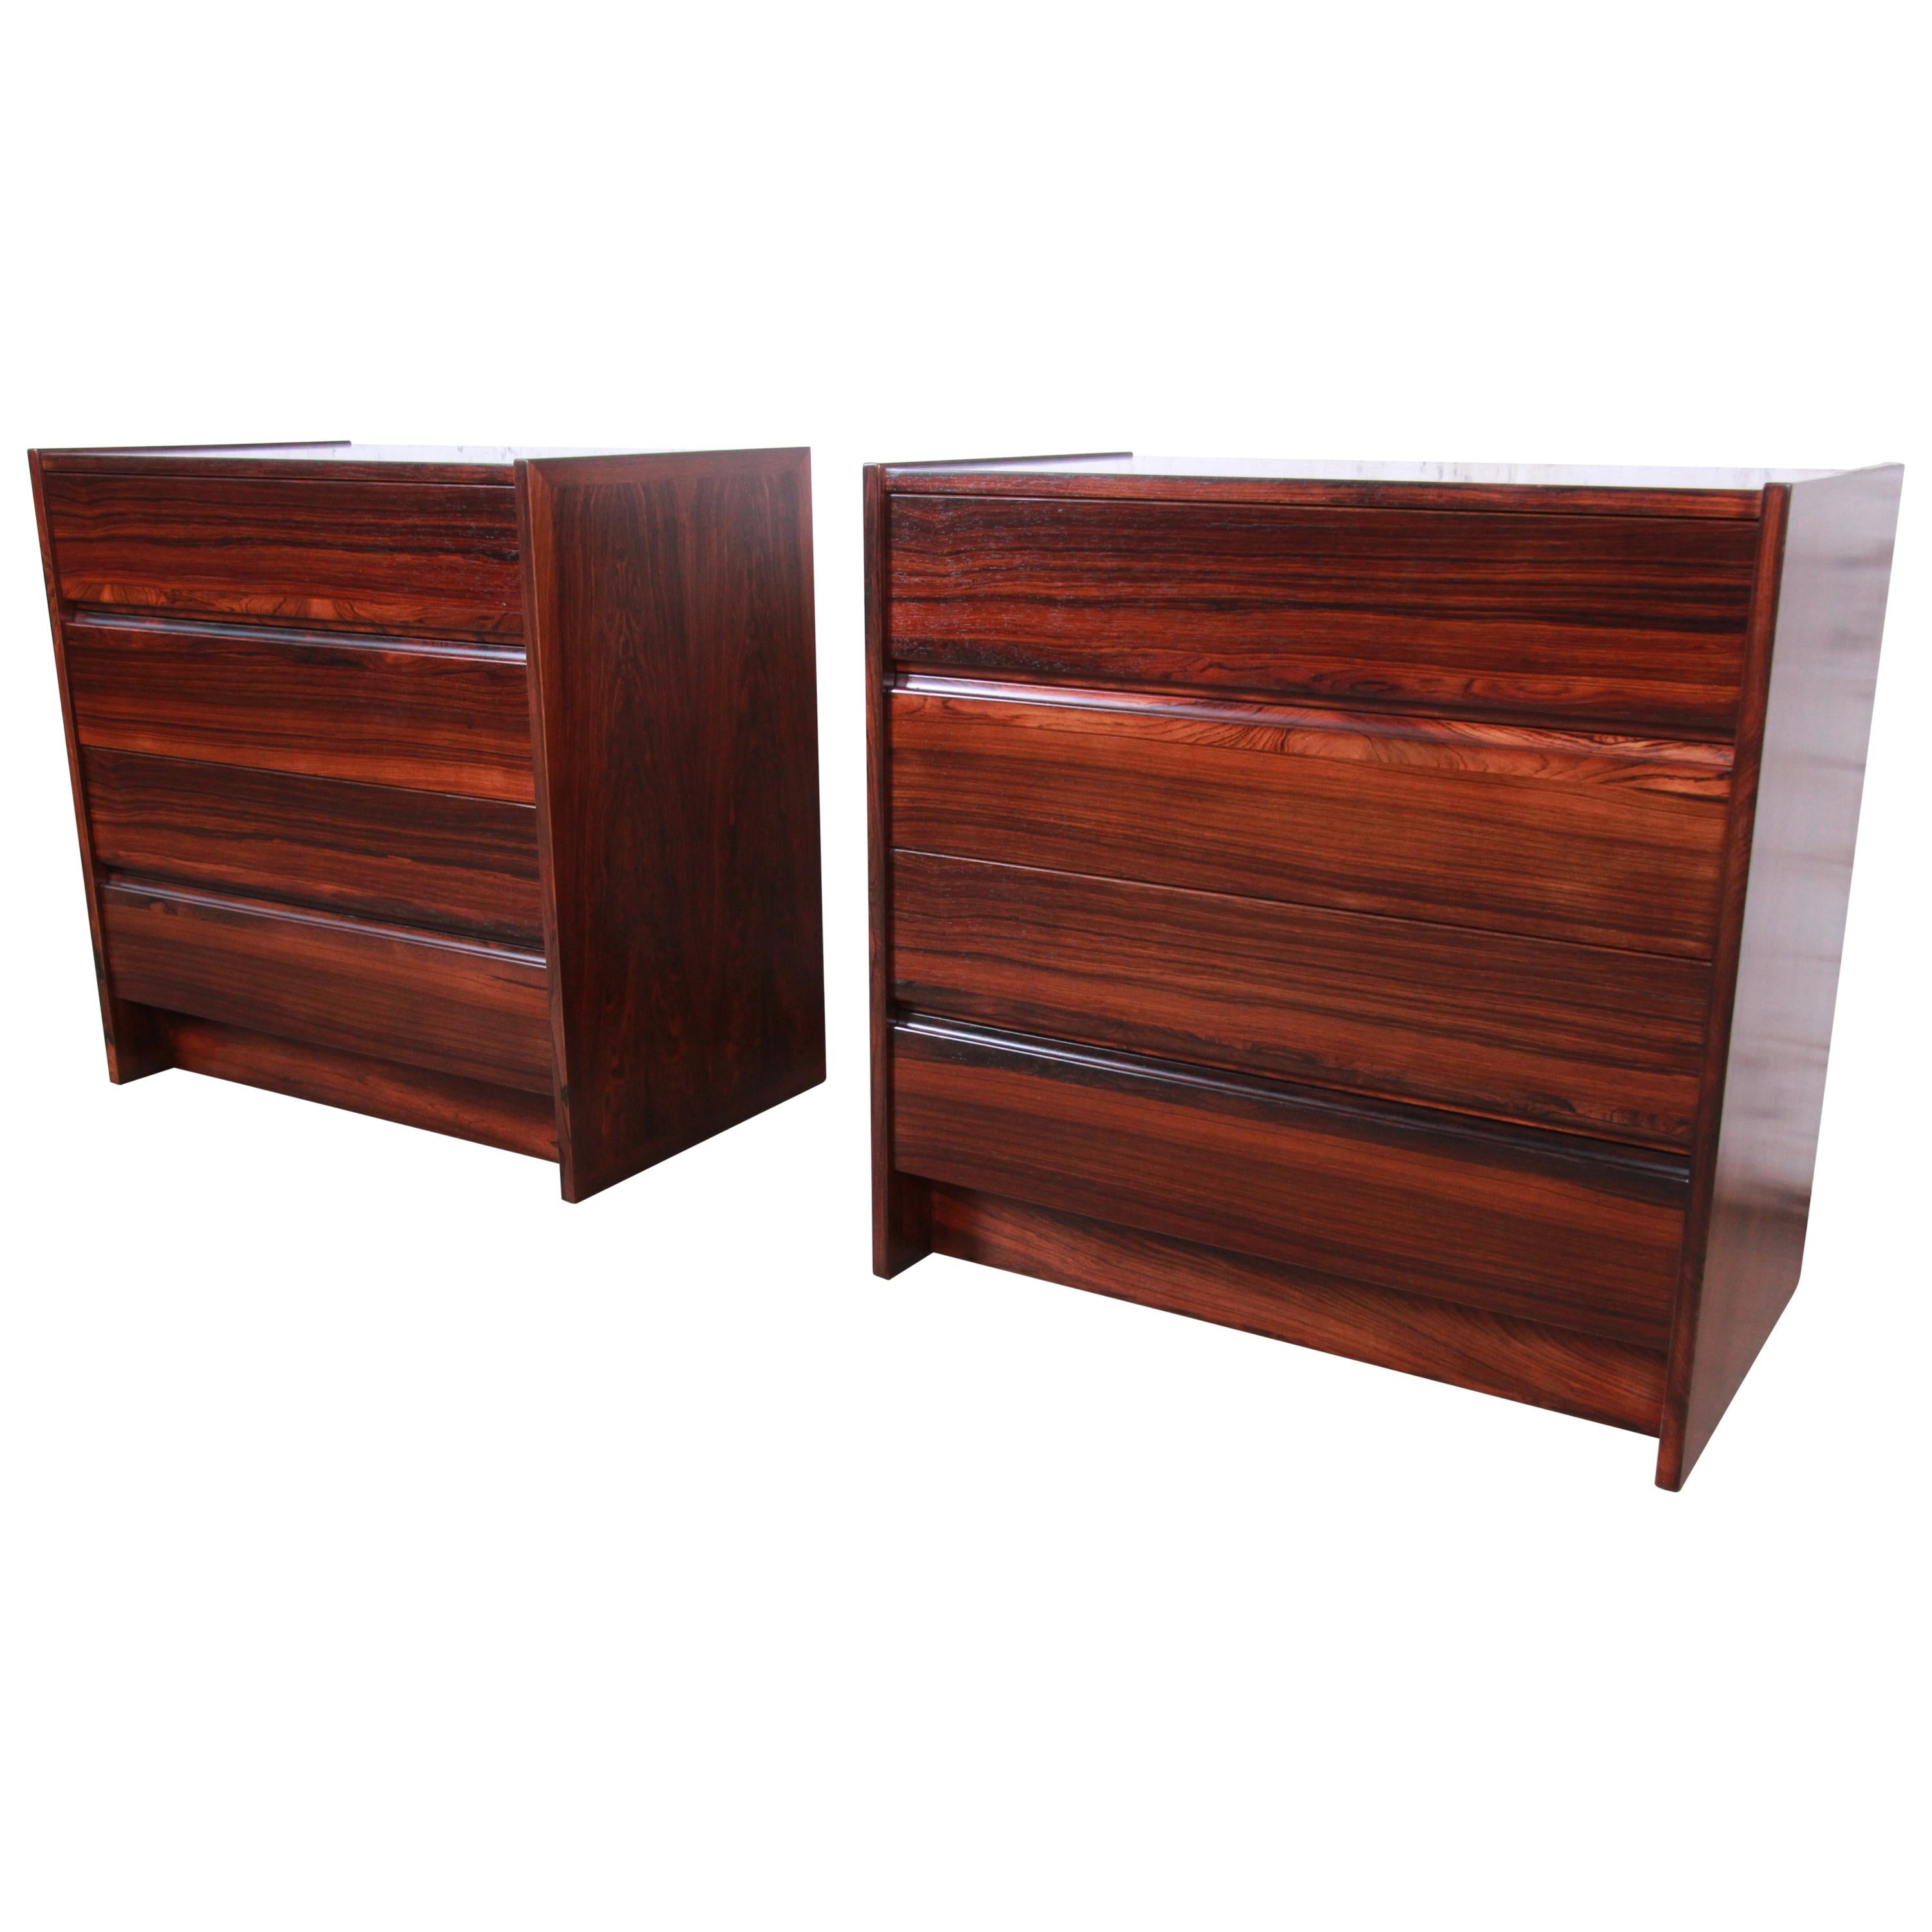 Danish Modern Rosewood Bachelor Chests or Large Nightstands, Newly Restored